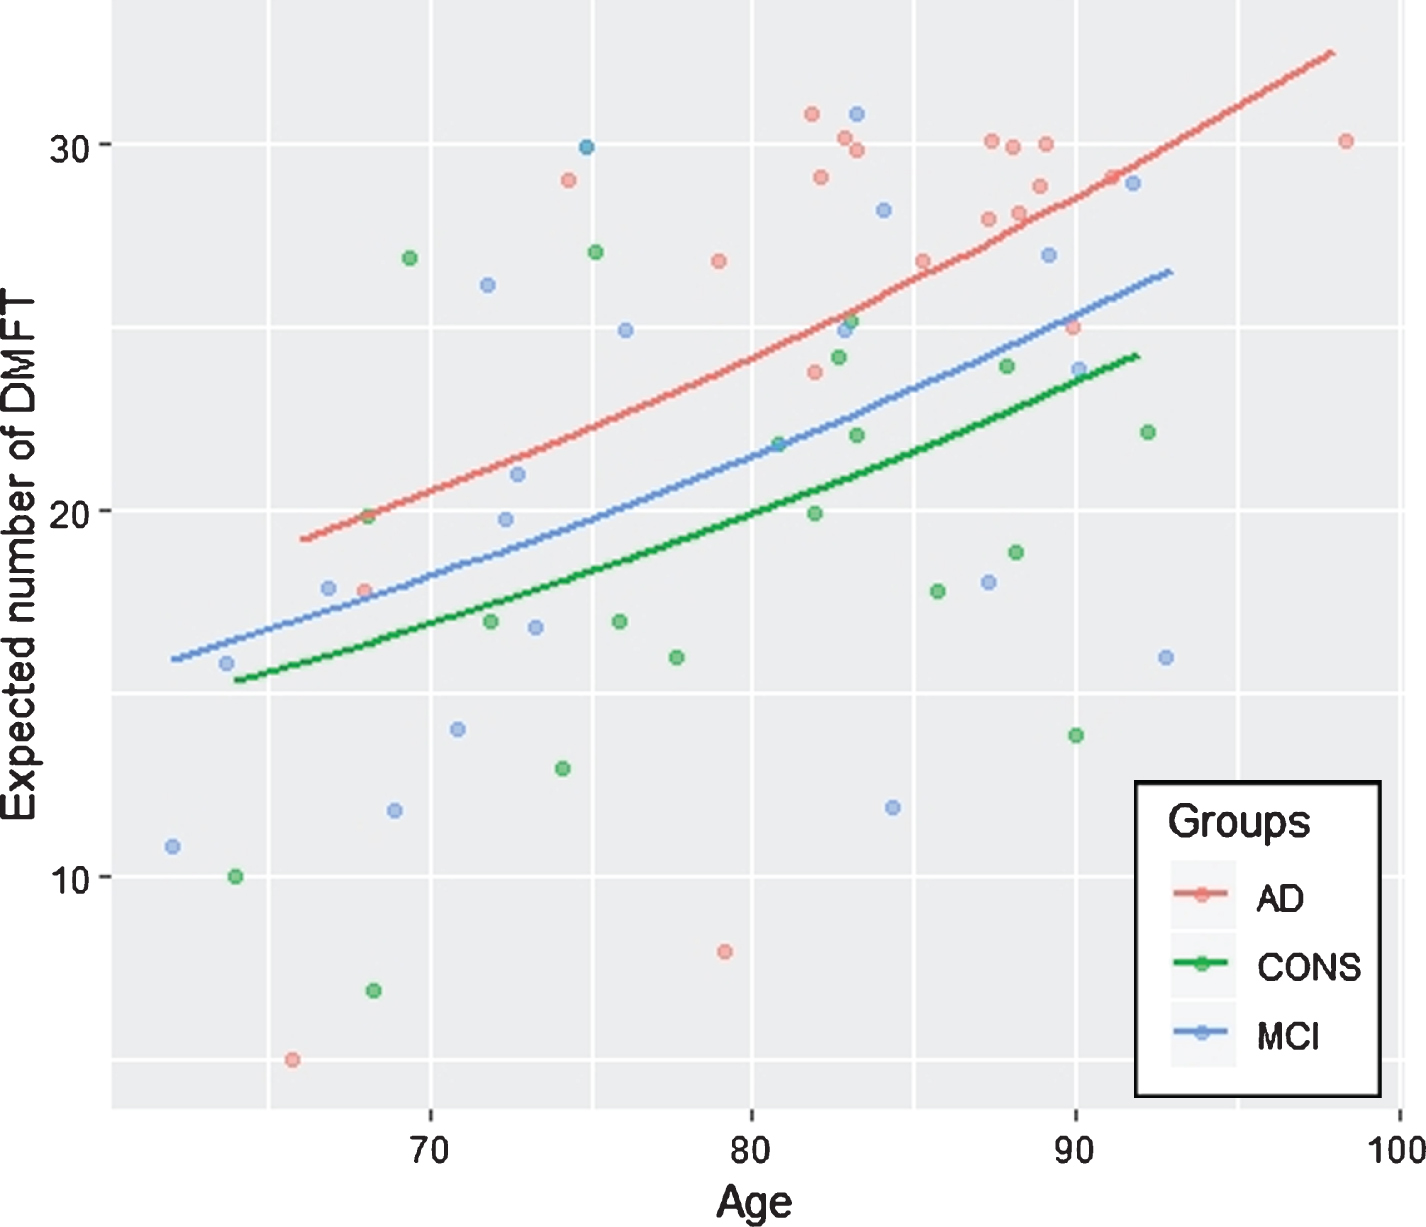 Predicted number of DMFT of subjects with age between 60 and 100 years in controls (CONS), amnestic mild cognitive impairment (aMCI), and Alzheimer’s disease (AD).